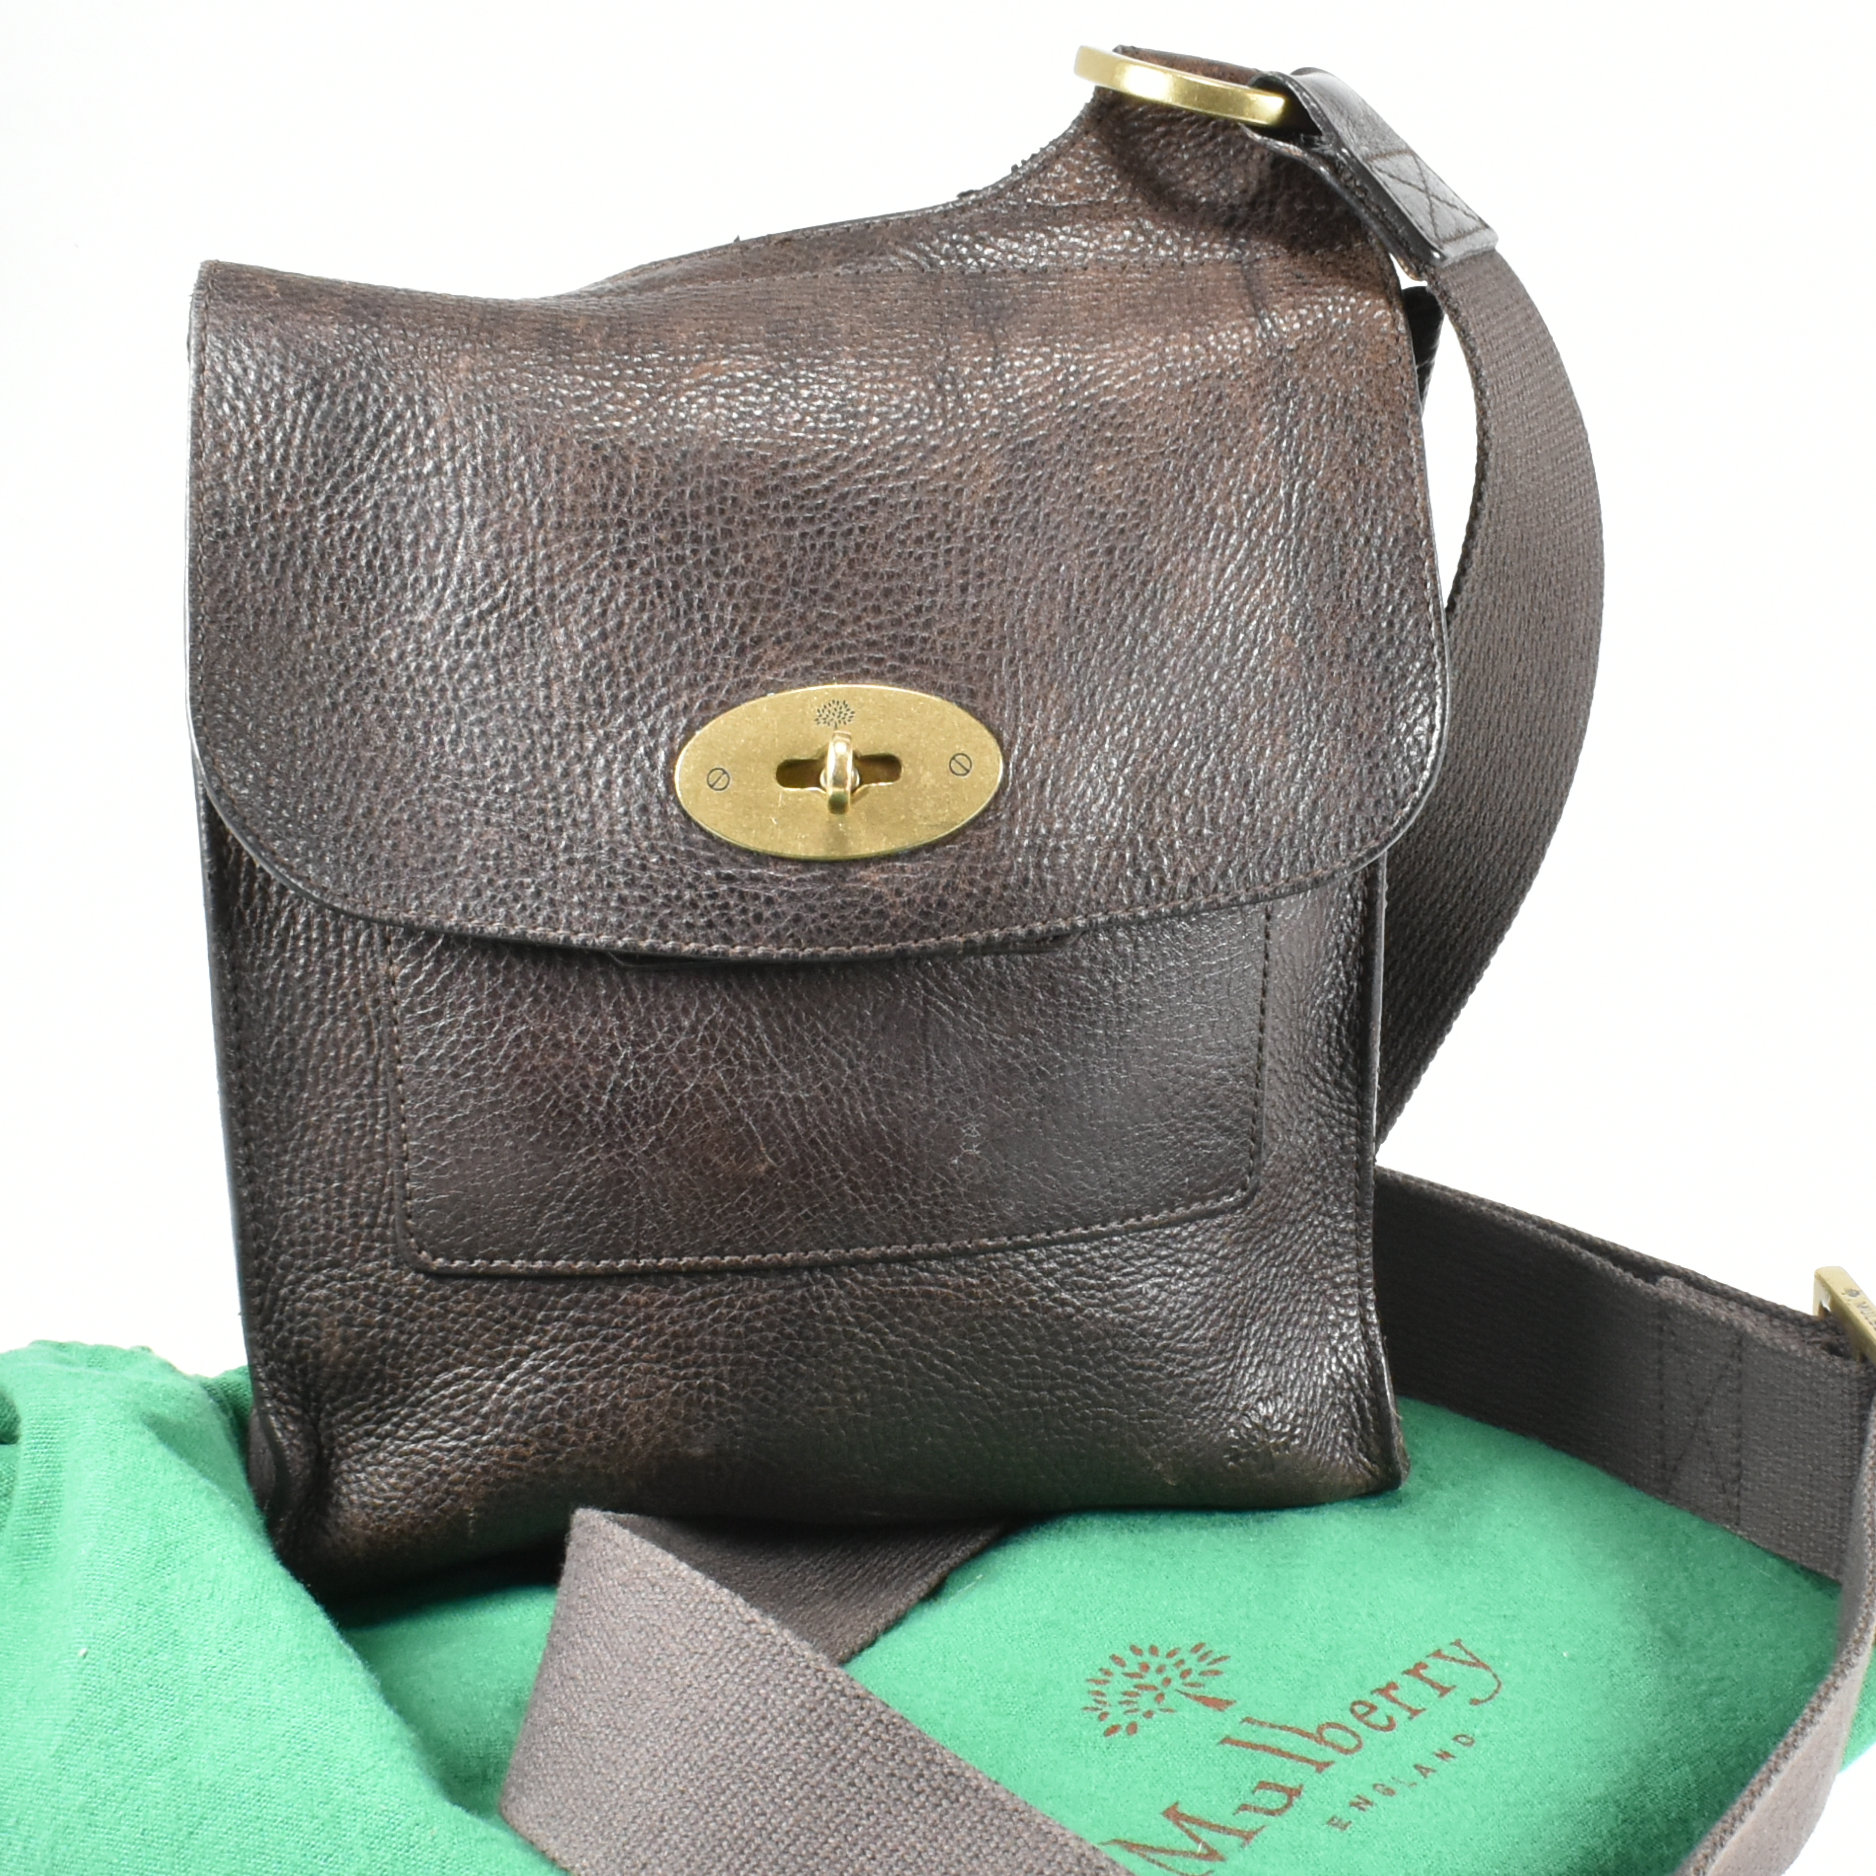 MULBERRY BROWN LEATHER ANTONY CROSSBODY BAG - Image 2 of 9